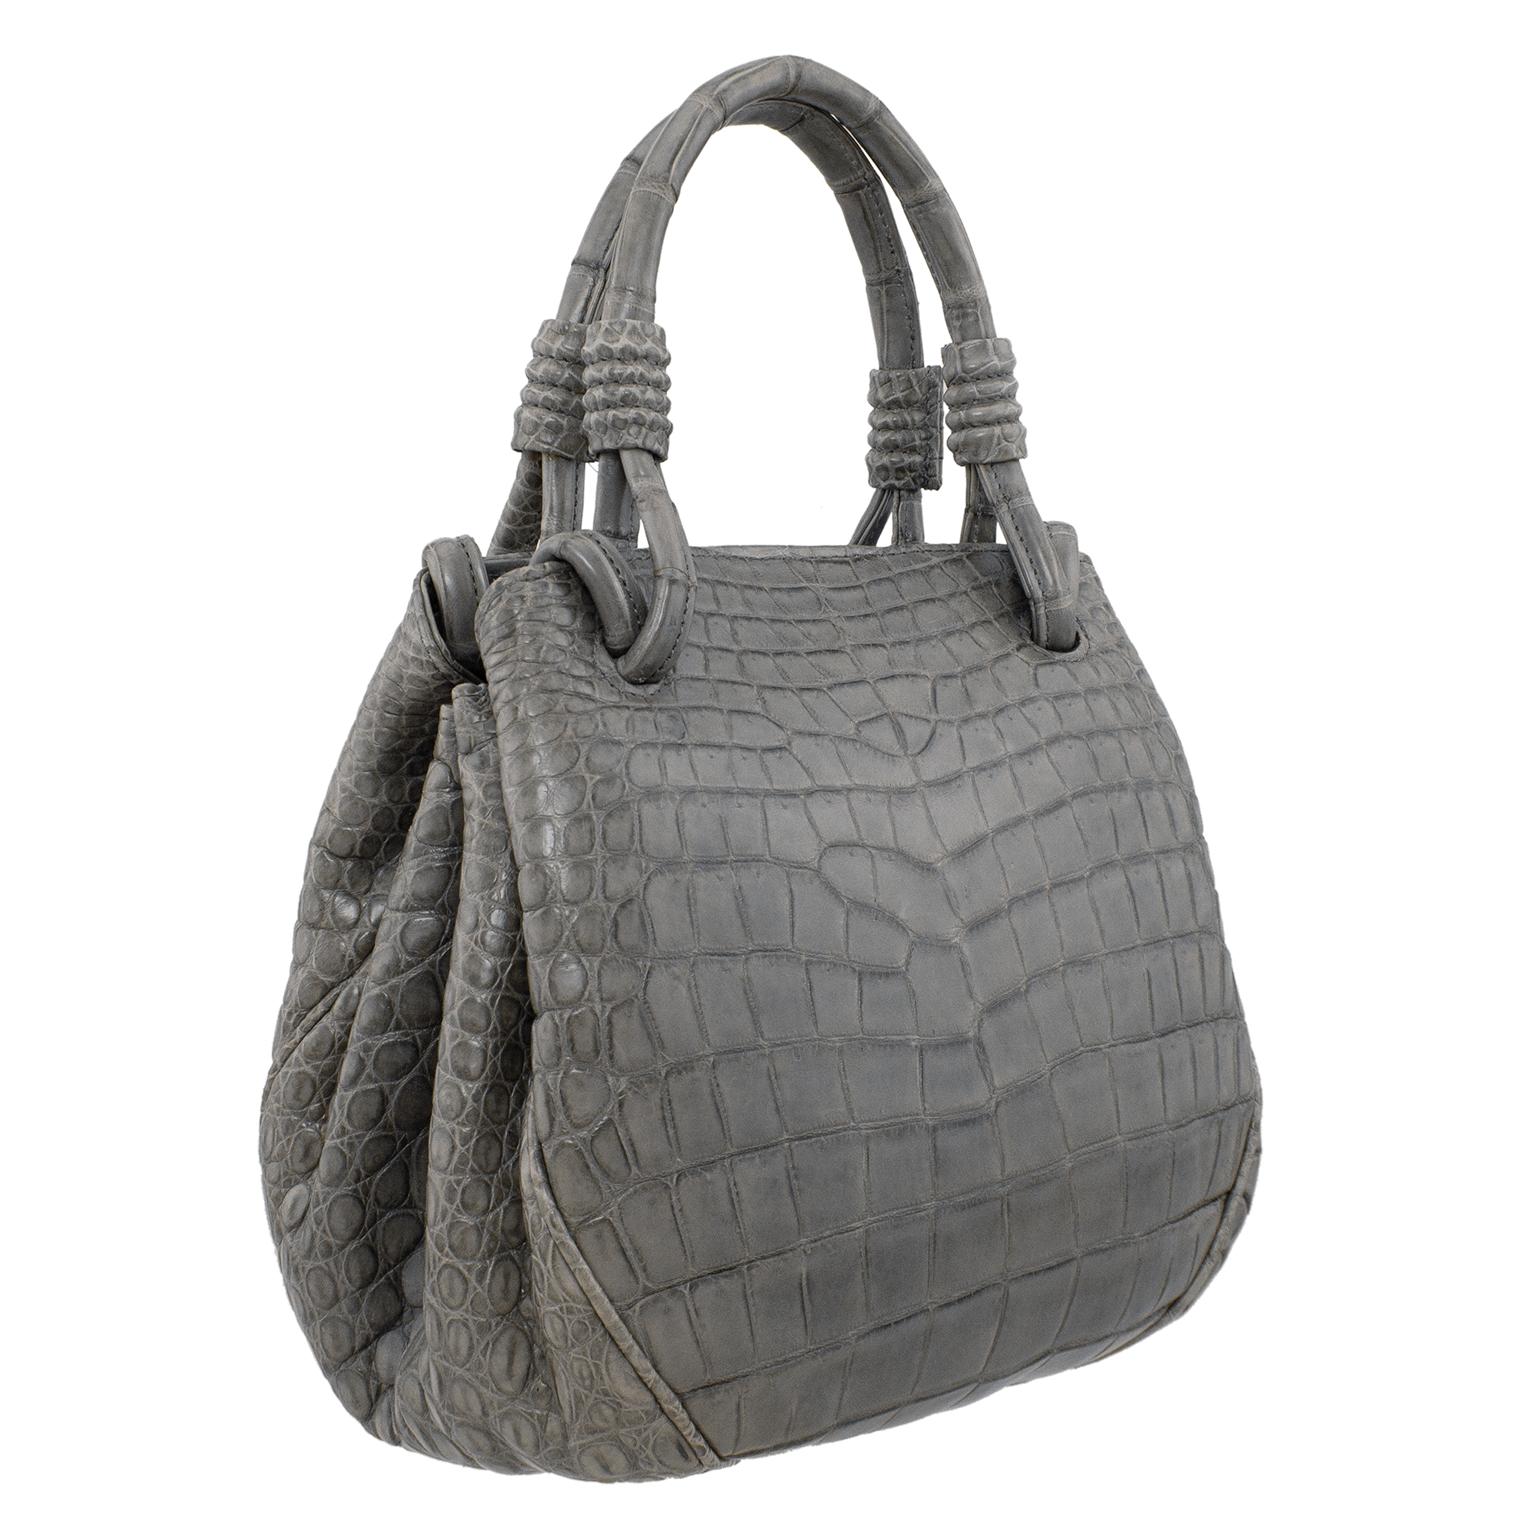 Just stunning supple matte grey reptile effect handbag made in Italy for high end Canadian retailer Davids in the 1990s. Great shape and size, slightly rounded with top handles. This bag looks like it is on the smaller size, but it opens accordion